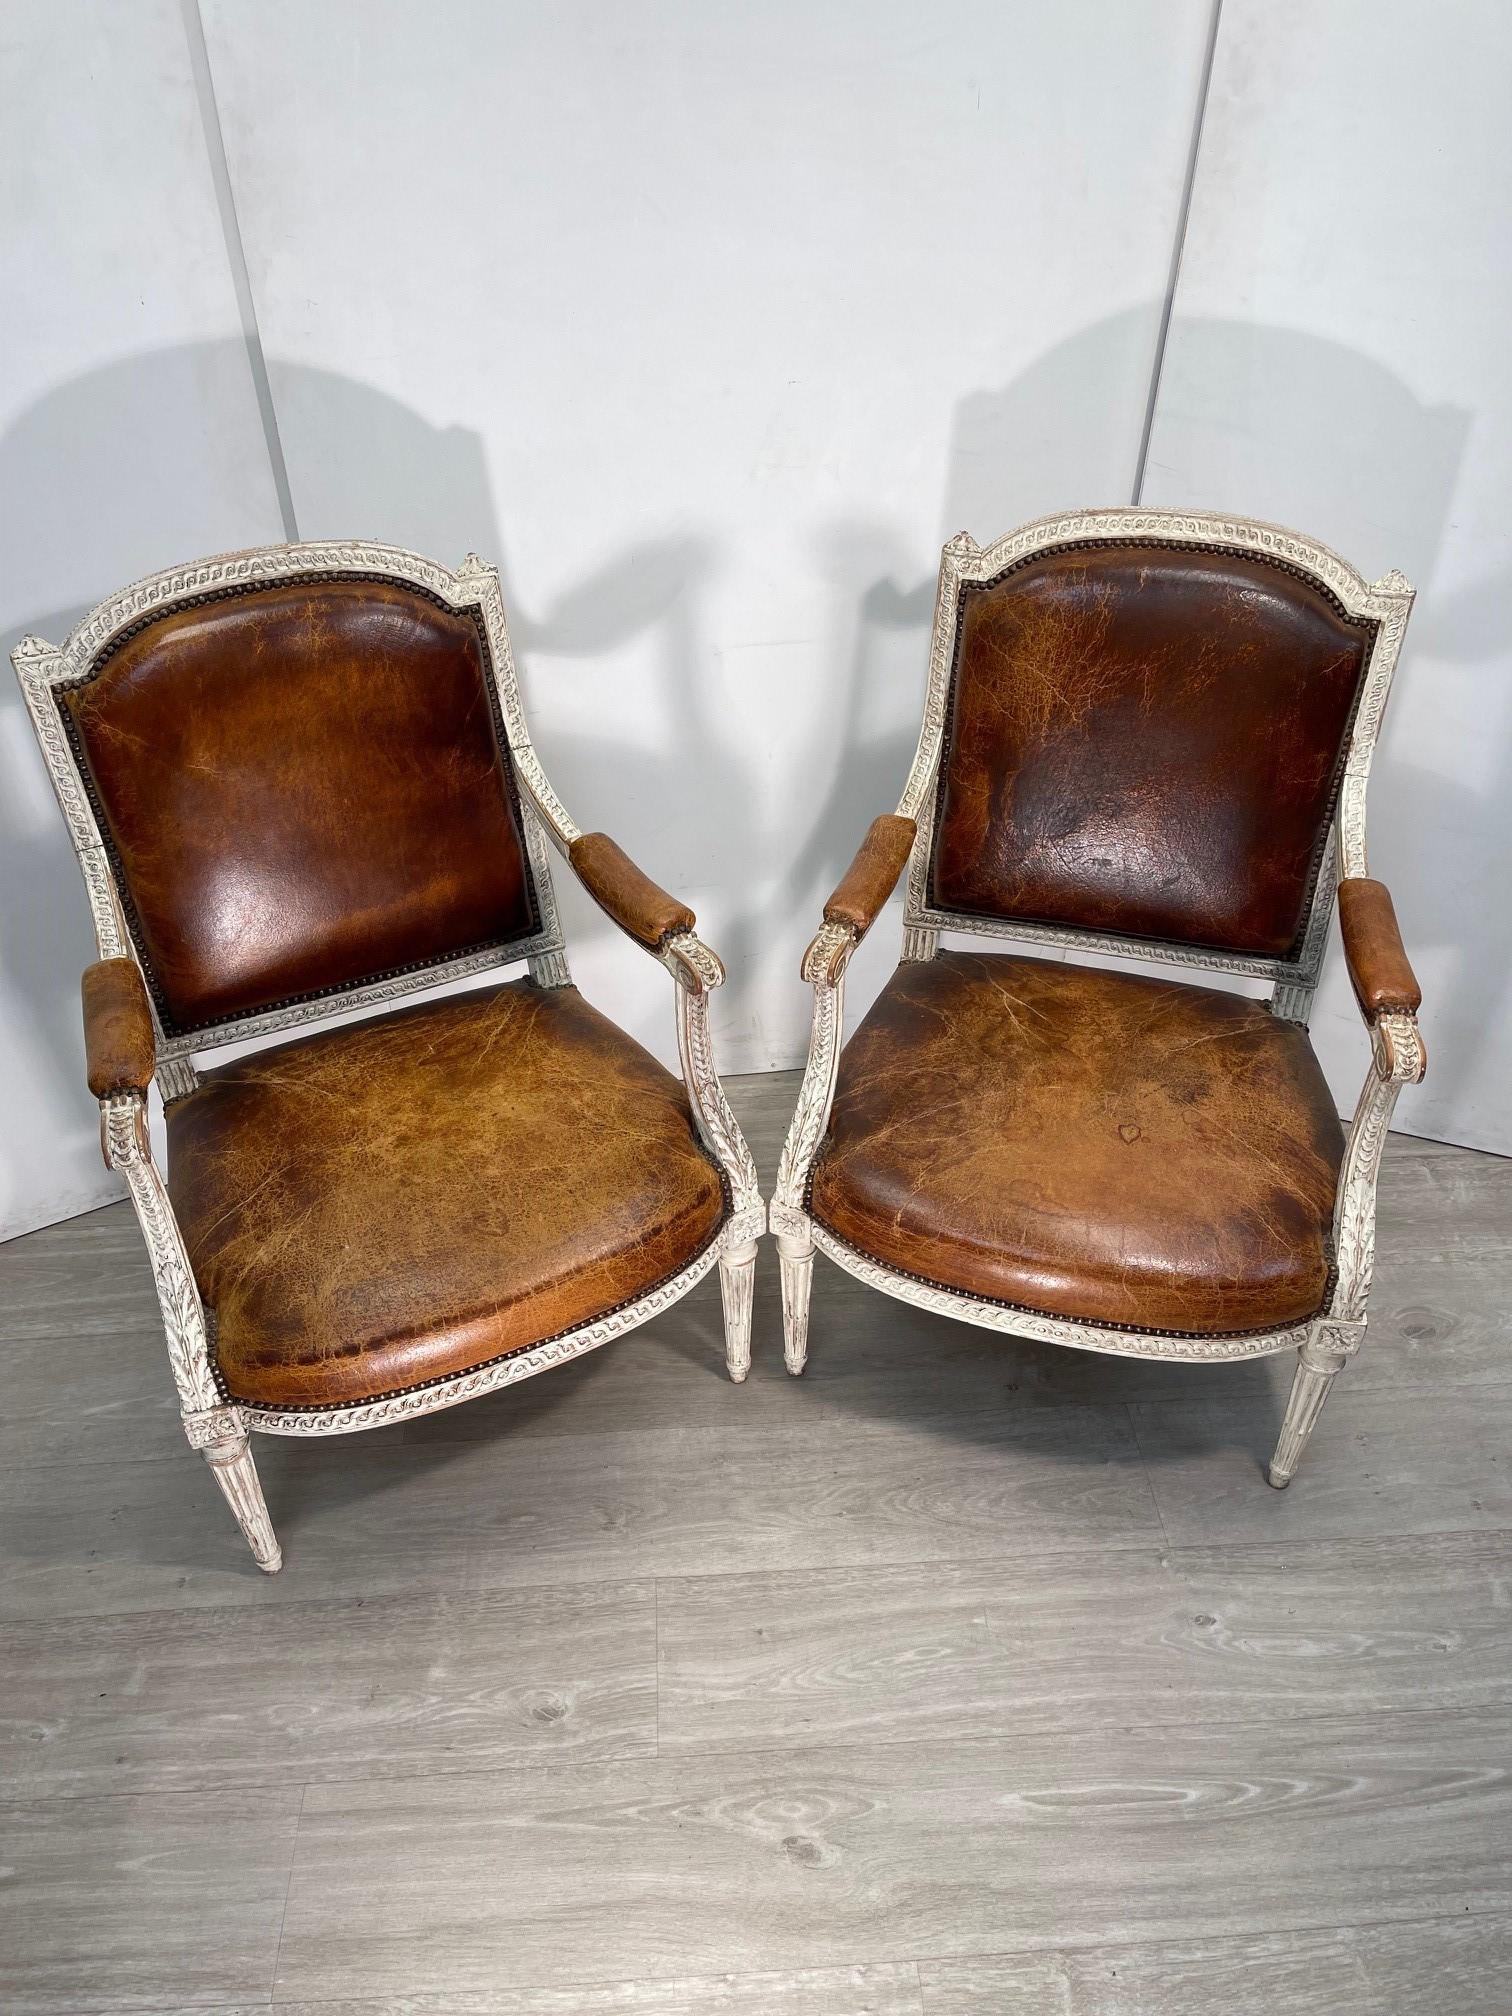 We are delighted to offer for sale this exquisite pair of original paint, Napoleon III, French, circa 1860 brown leather armchairs 

A very good looking well made and decorative pair, I’ve not come across another set of original paint armchairs in